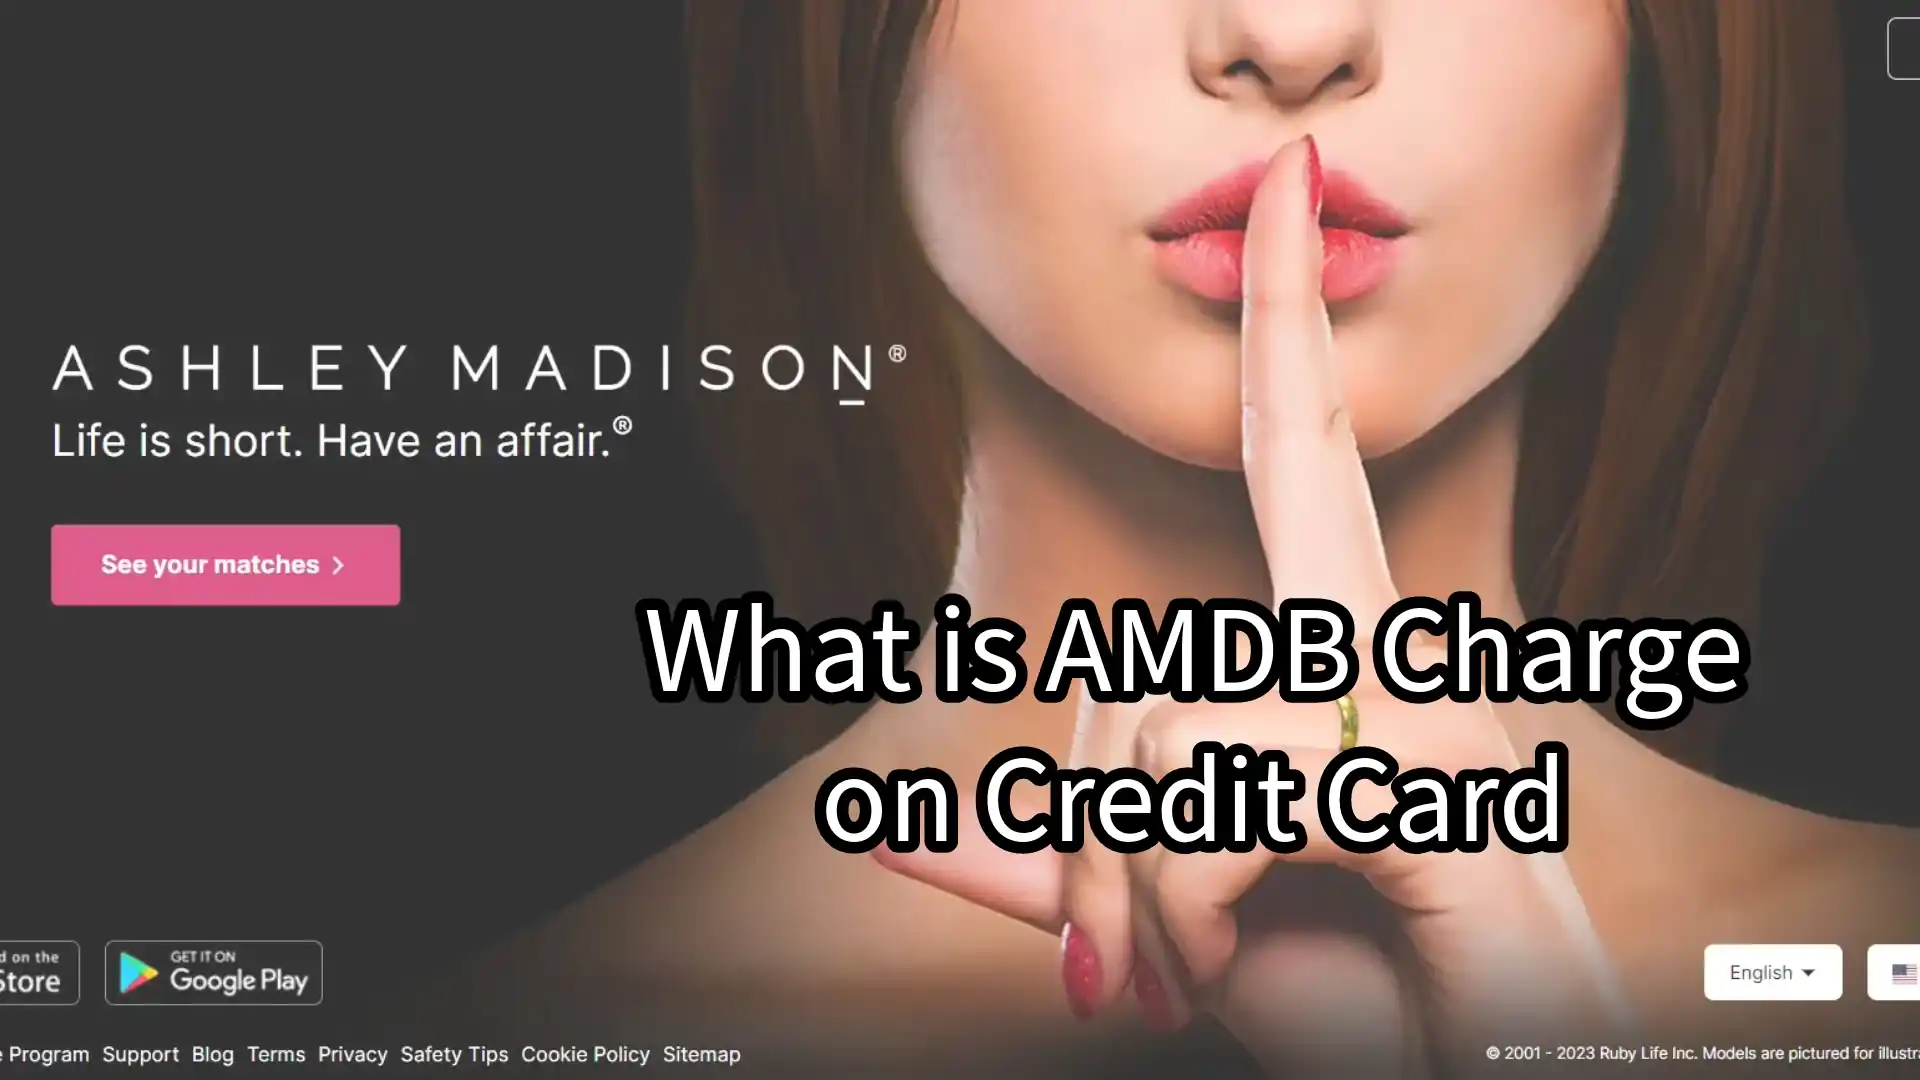 The Truth Behind AMDB Charge on Credit Card